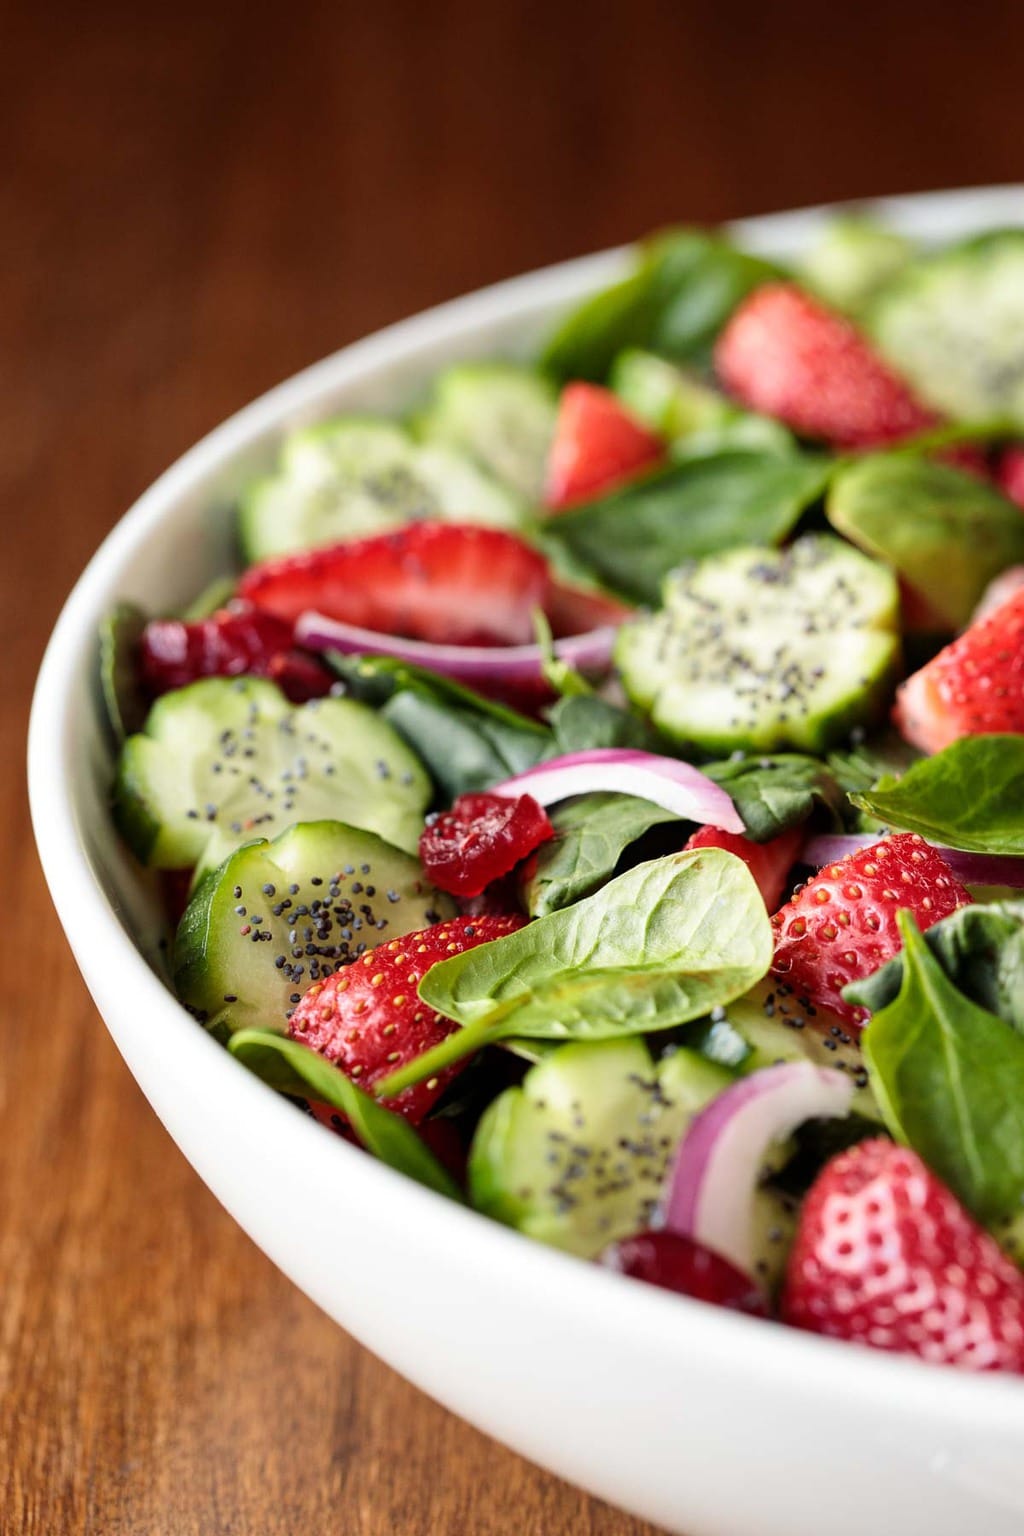 Vertical closeup photo of a Strawberry Spinach Salad in a white serving bowl on a wood table.